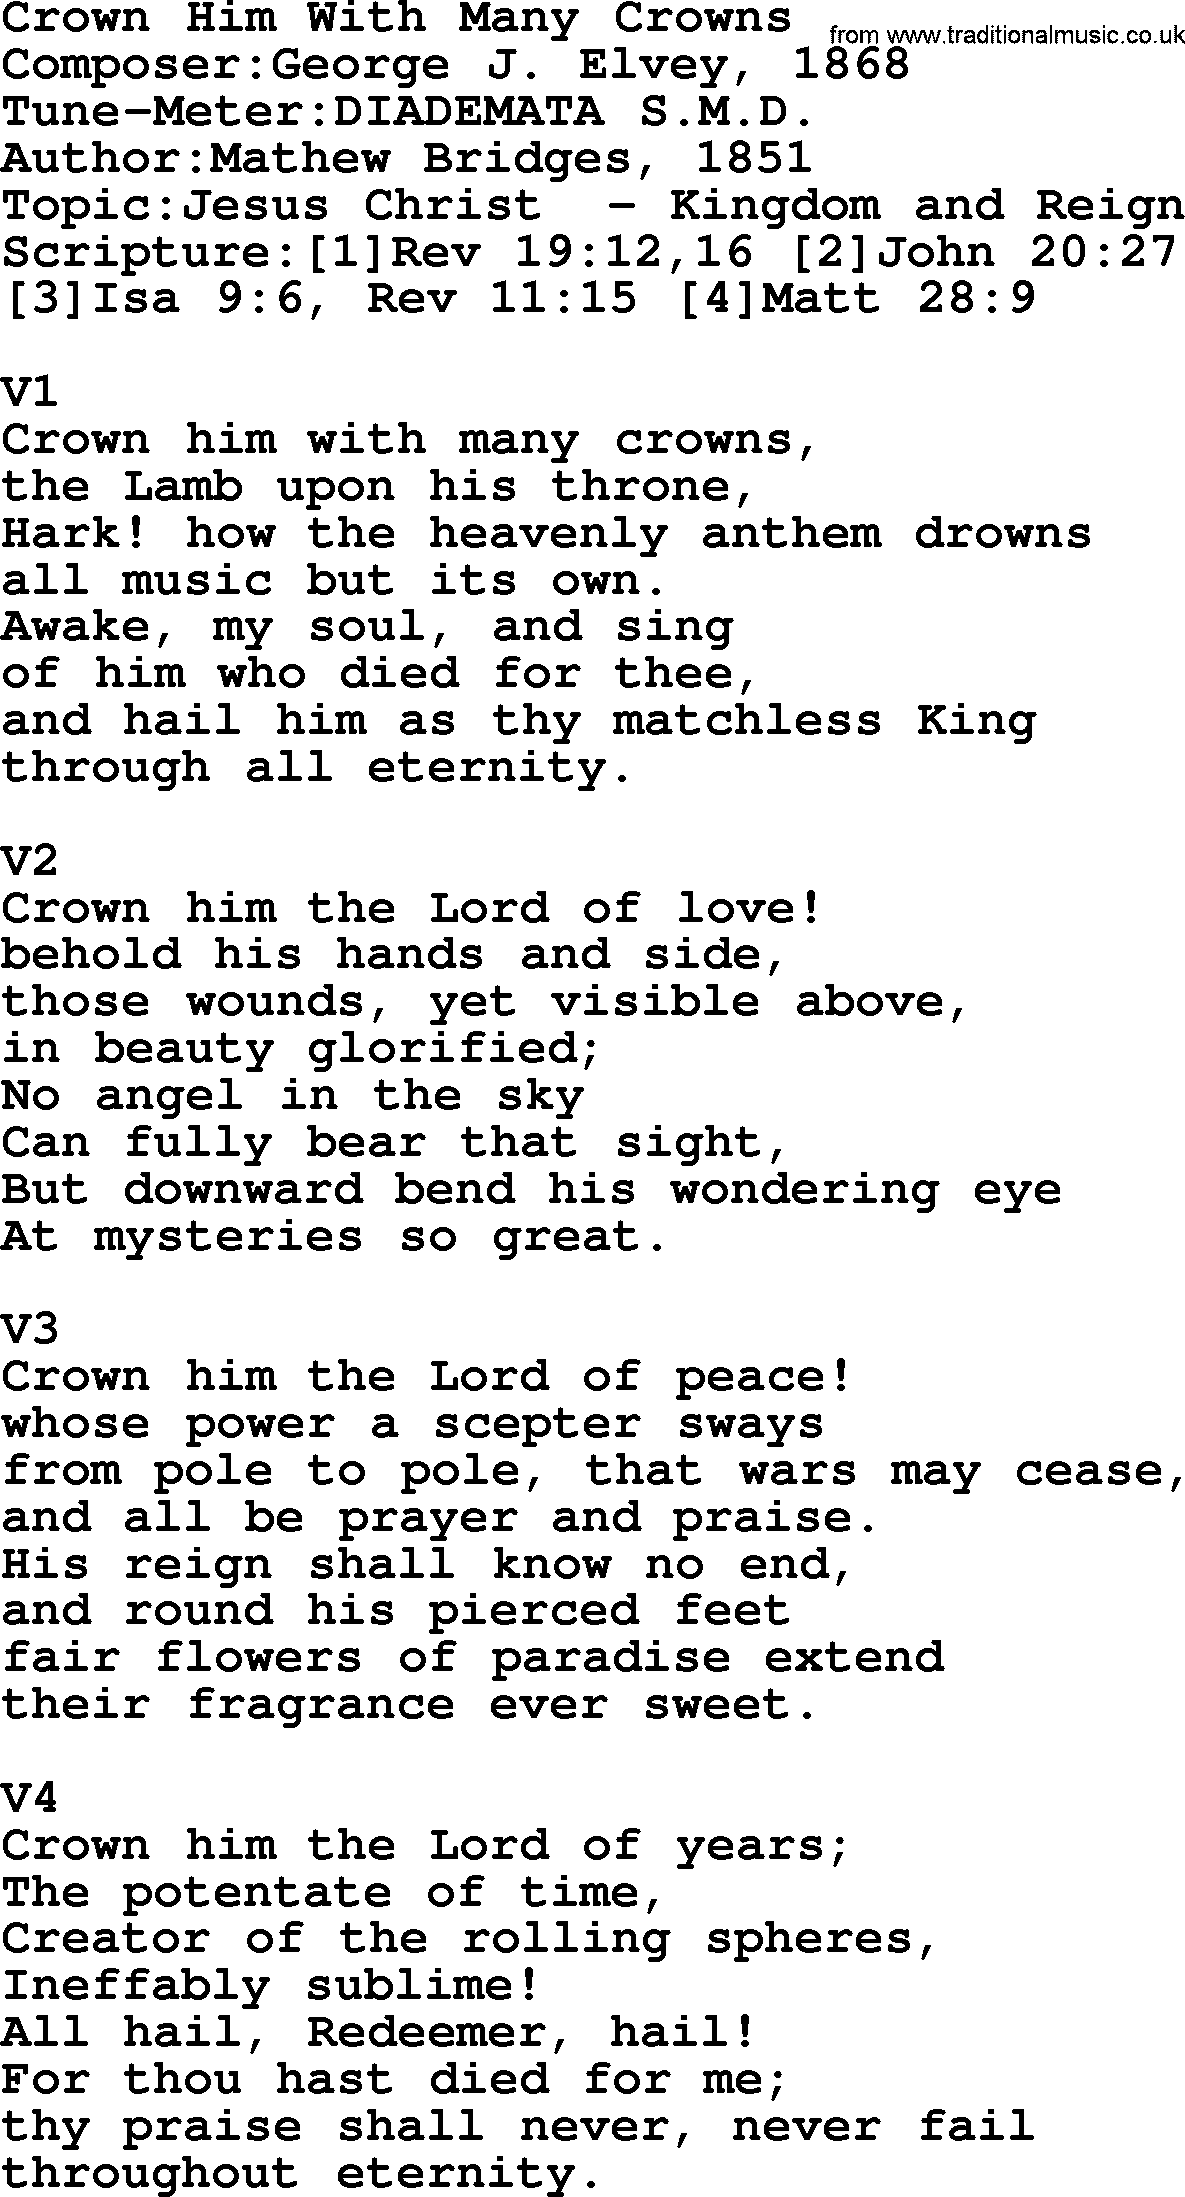 Adventist Hynms collection, Hymn: Crown Him With Many Crowns, lyrics with PDF